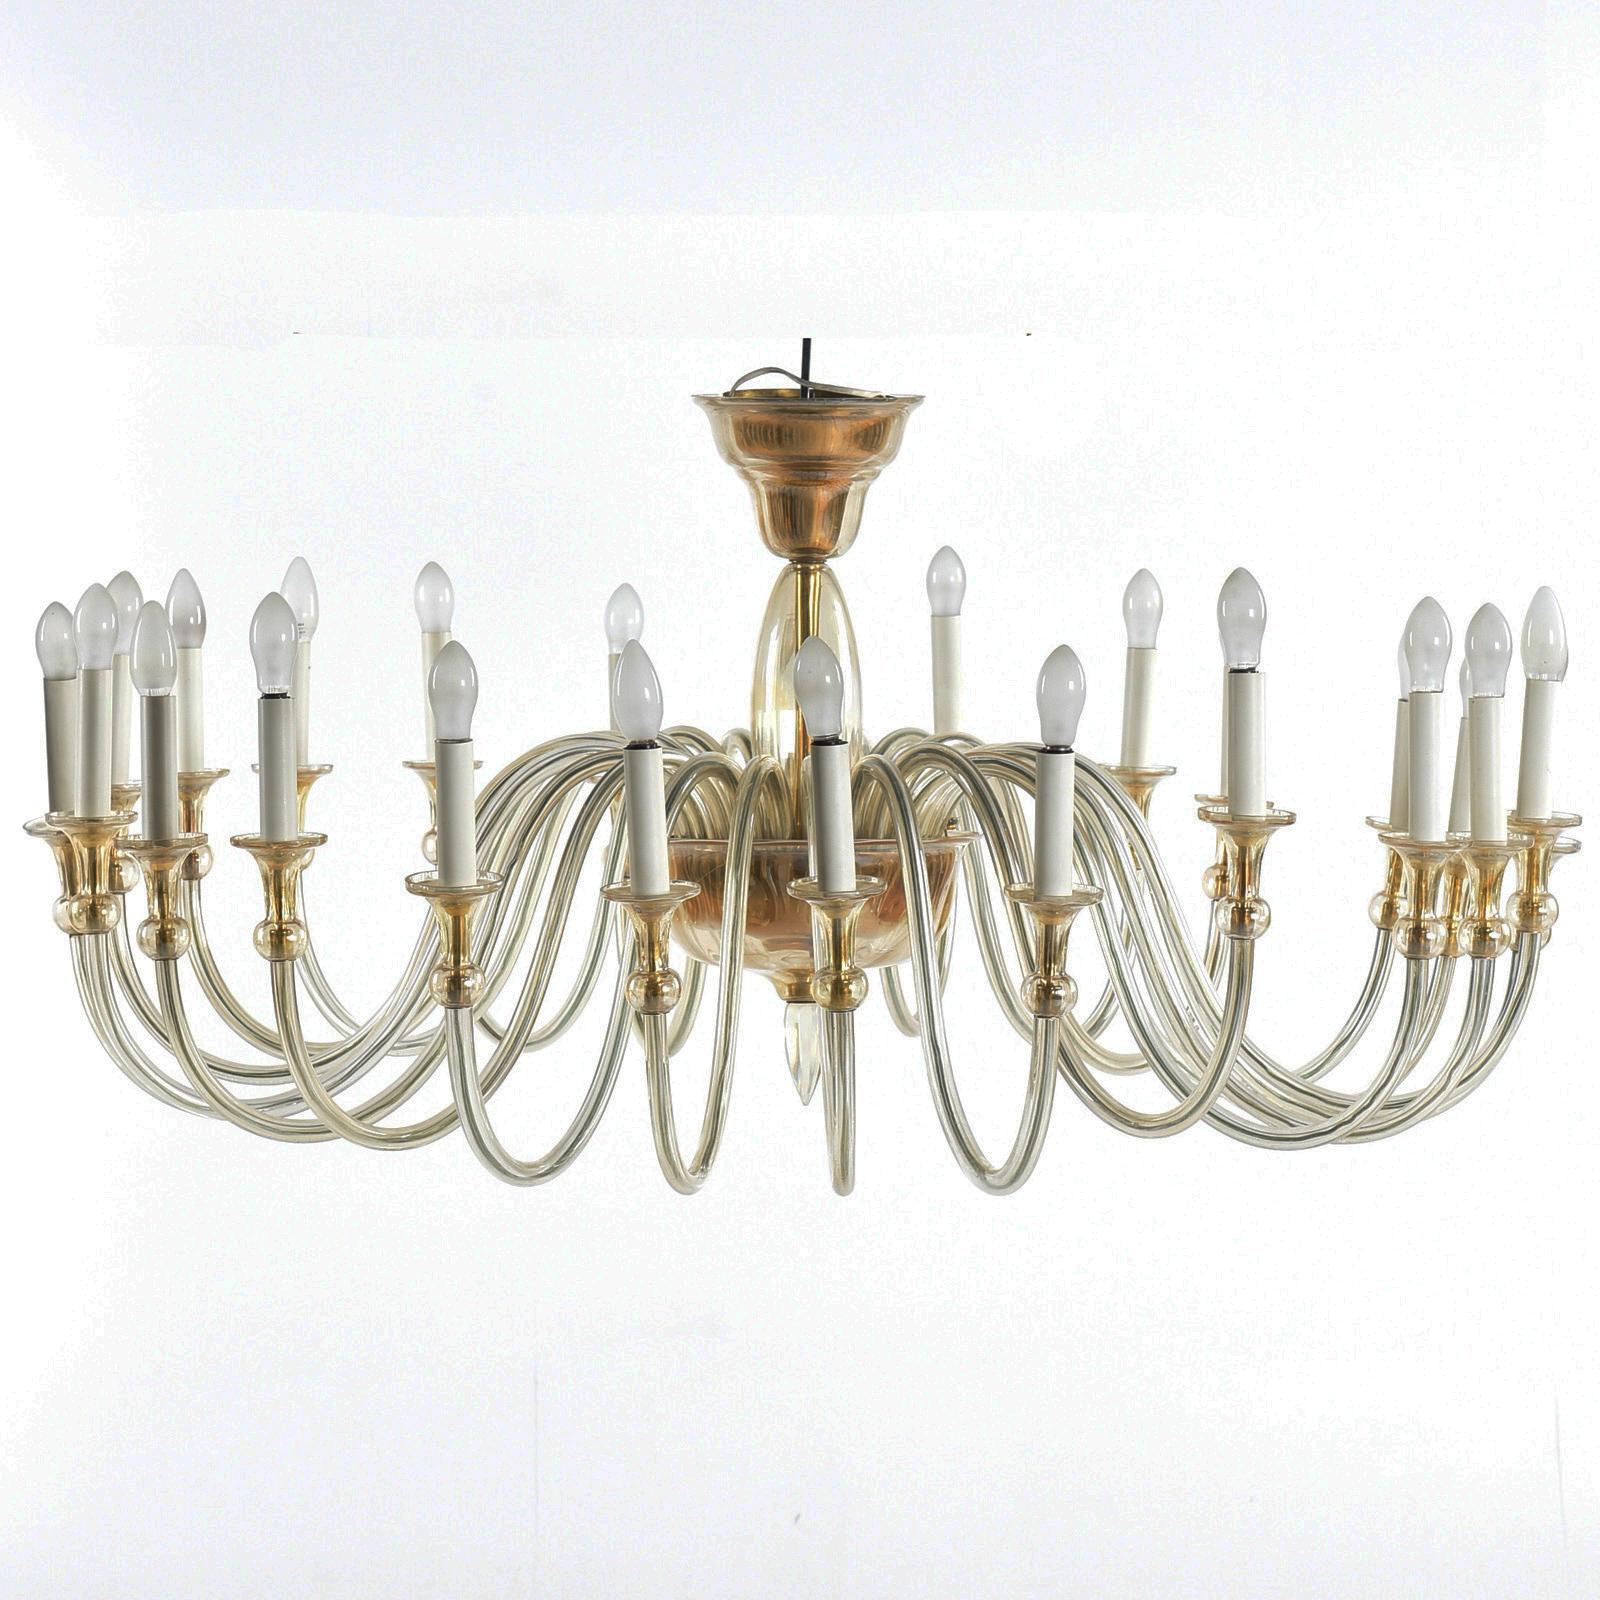 Large Murano amber-glass chandelier with 24 arms, fitted with E14 sockets. Made in the 1950s in Italy.
Will be delivered in a wooden box.